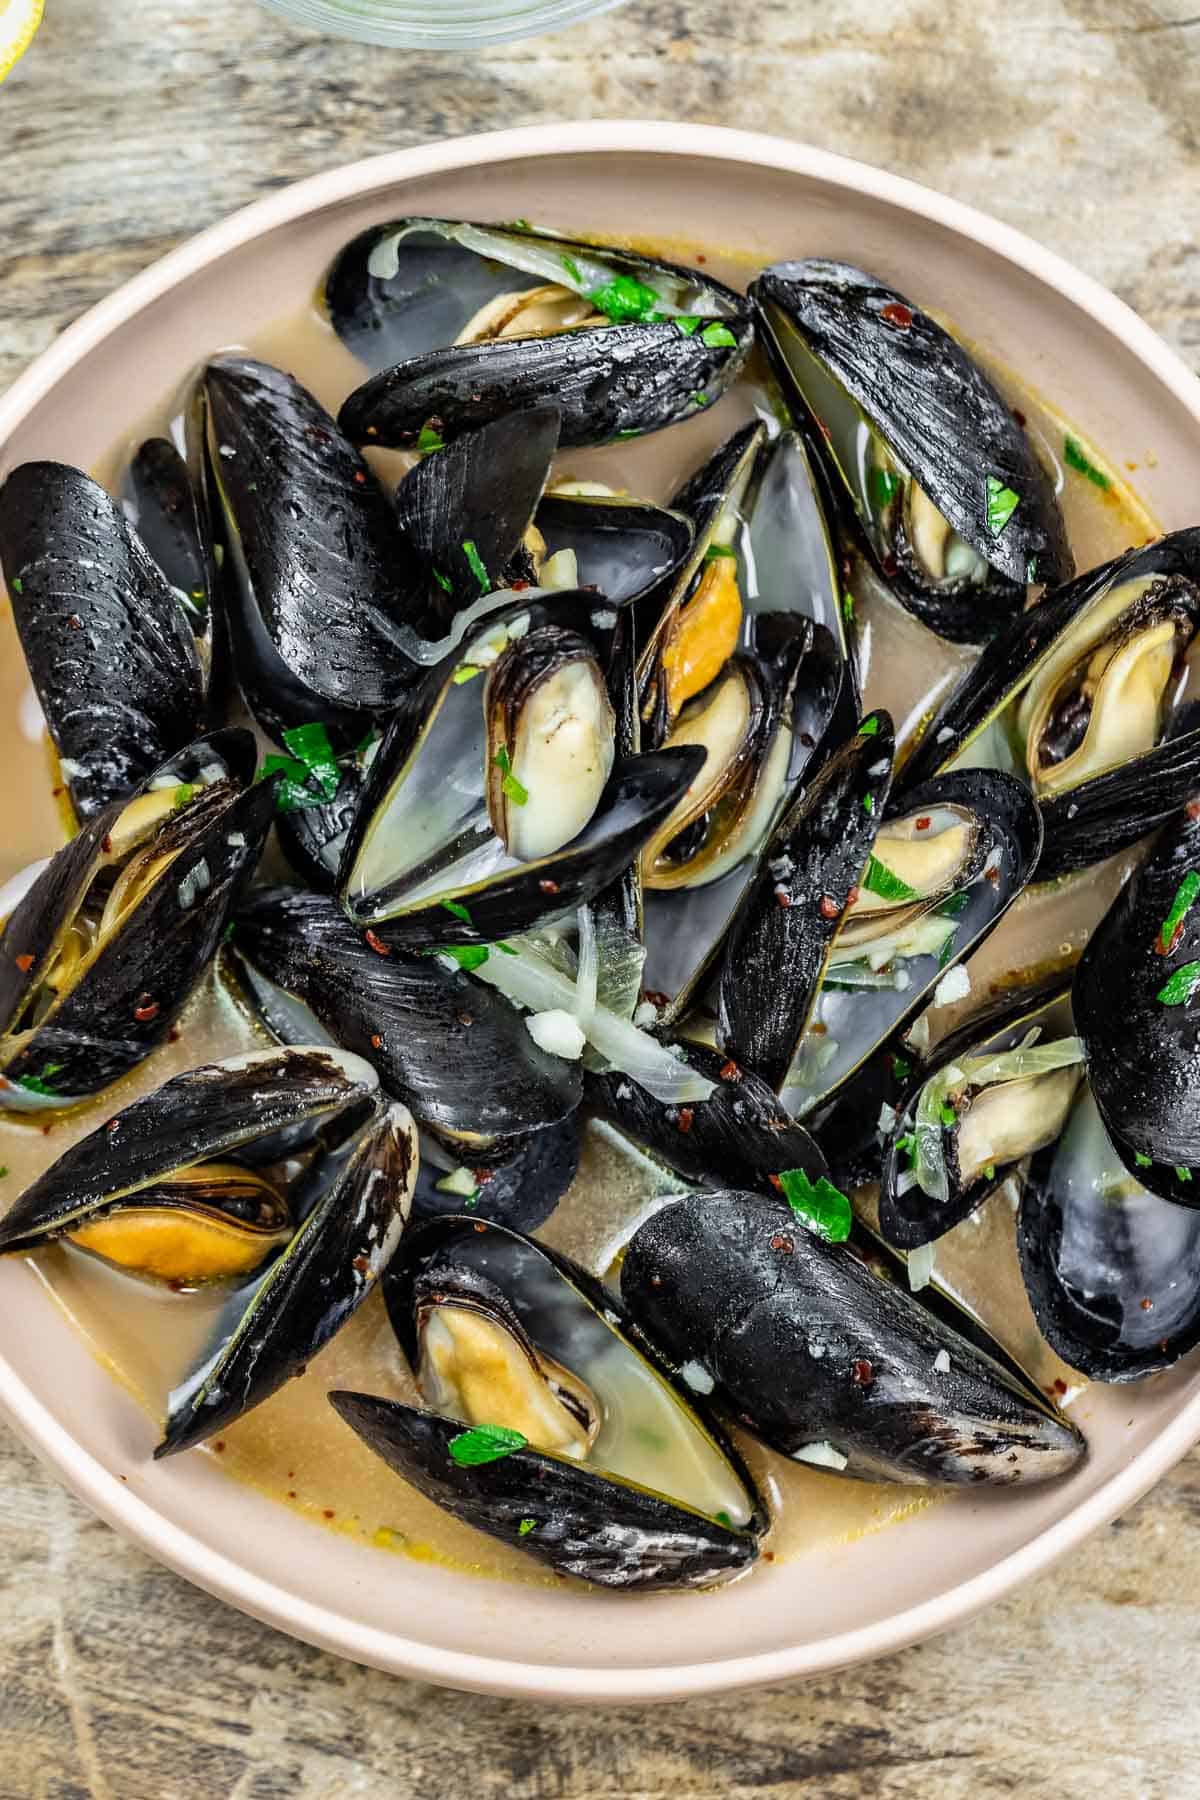 Steamed mussels in a small bowl.